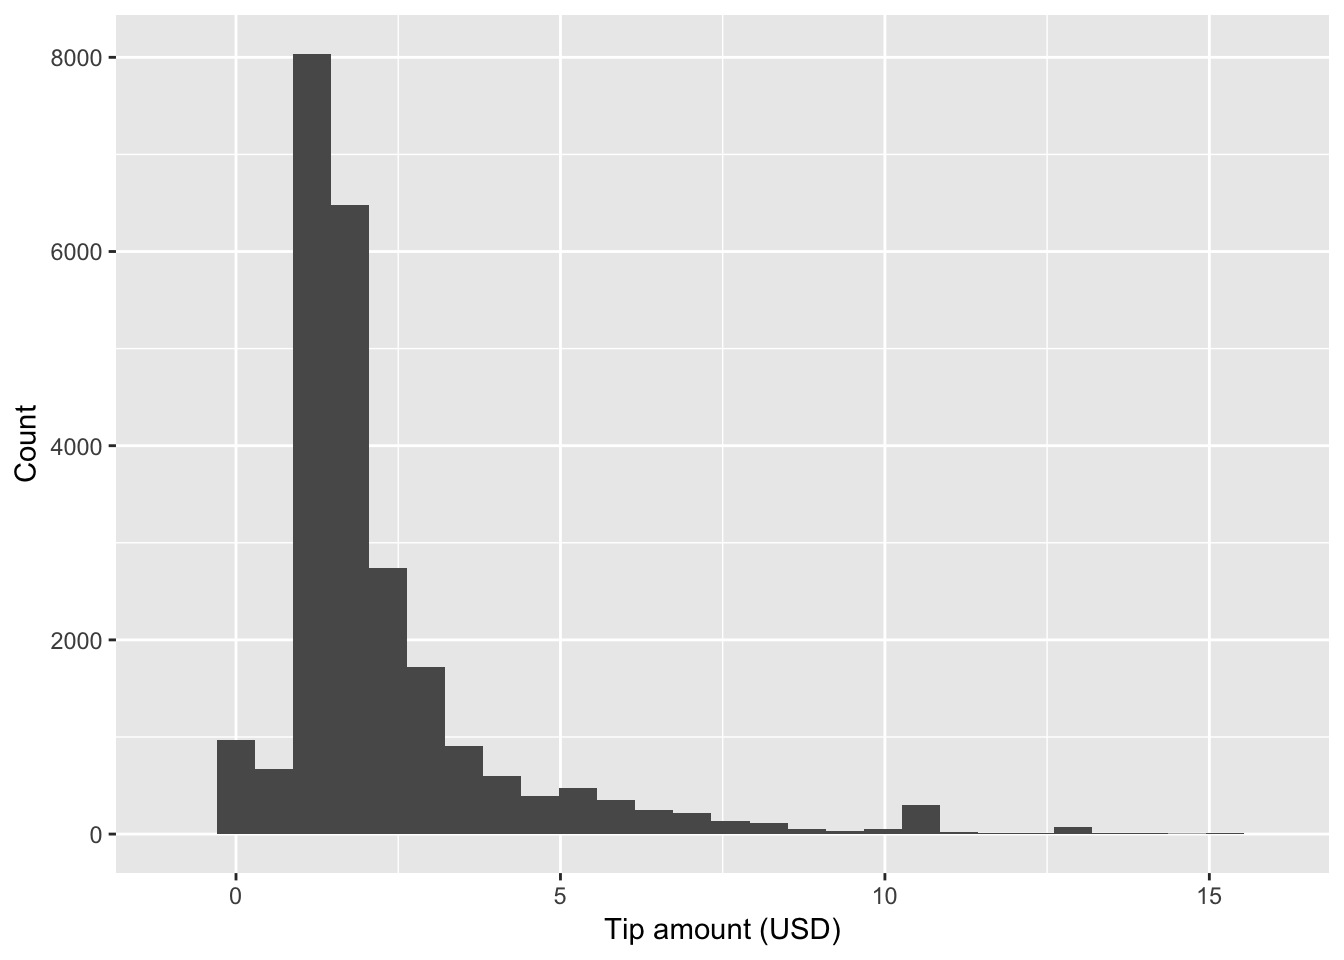 The distribution of tip amounts when omitting cash payments